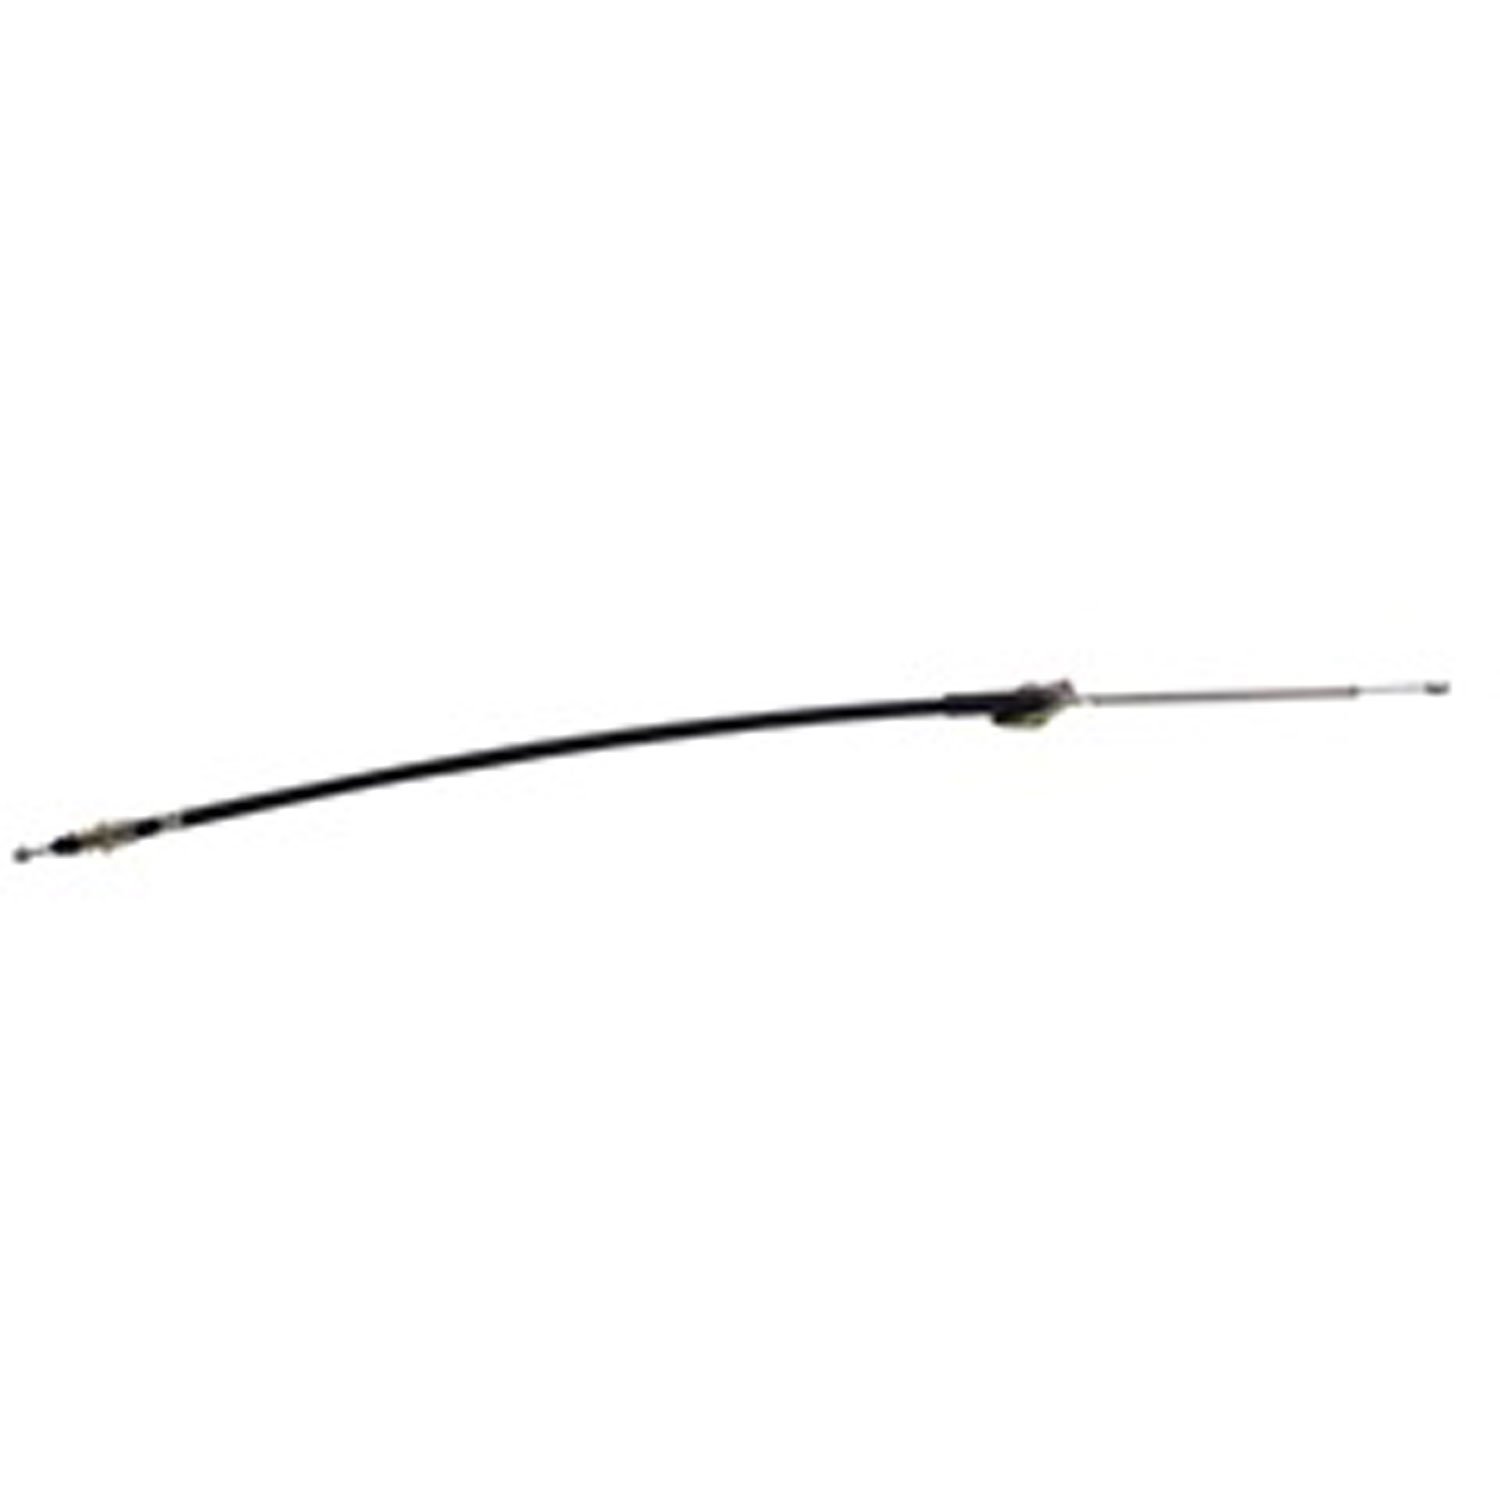 Emergency Brake Cable Rear With 11 inch Brakes